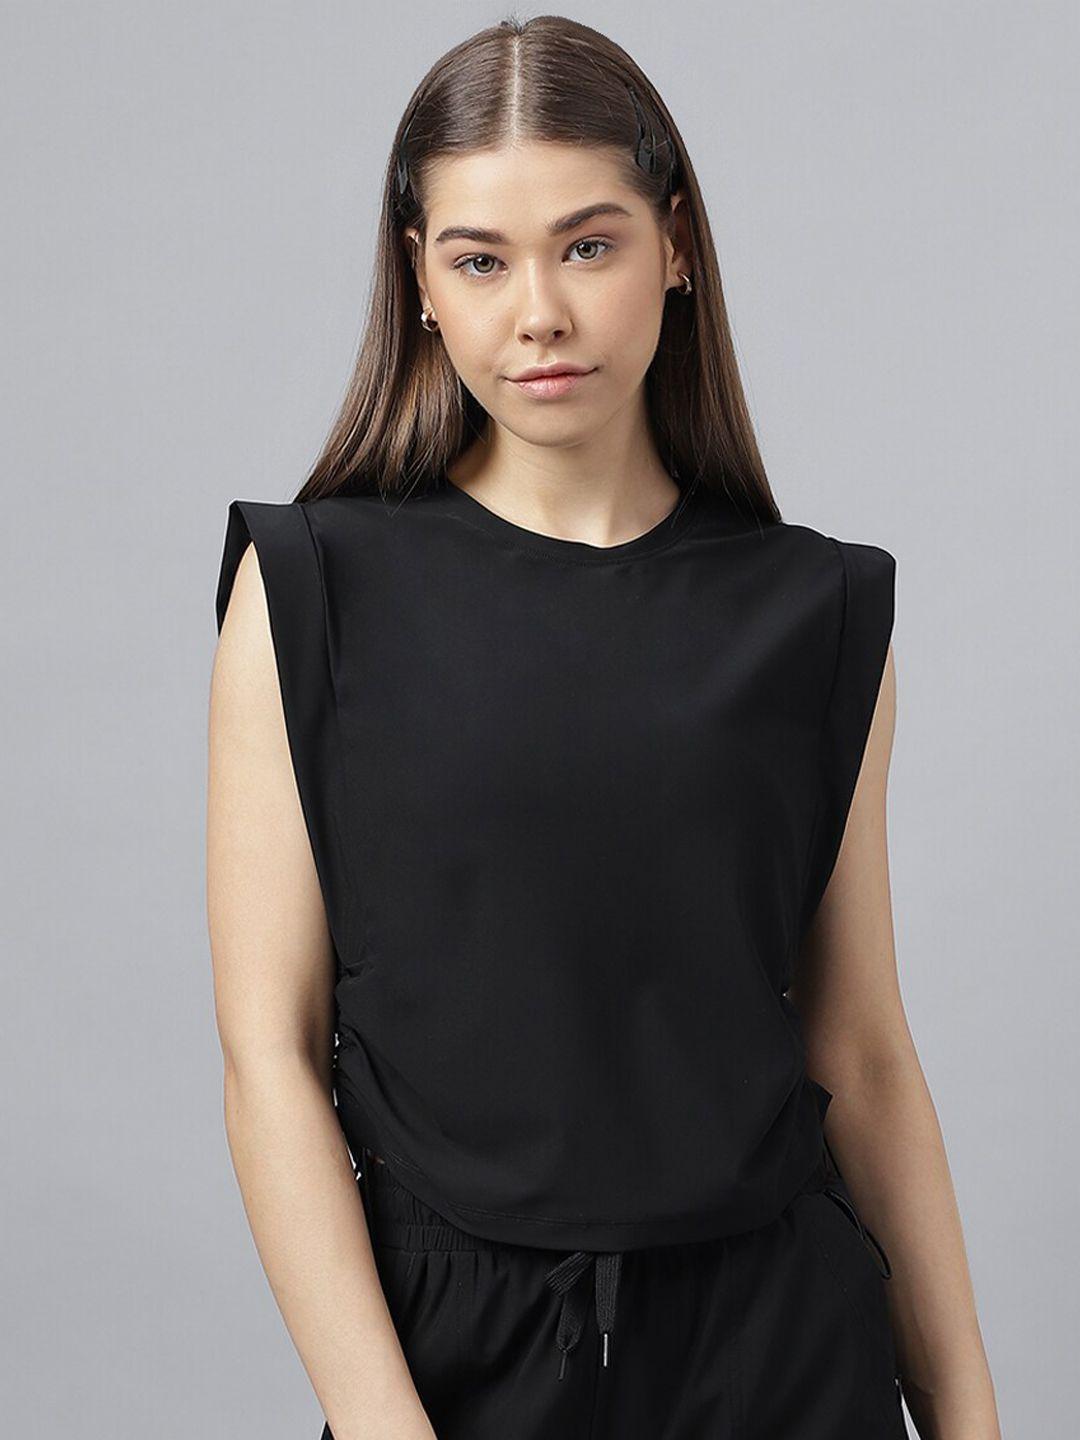 fitkin black top